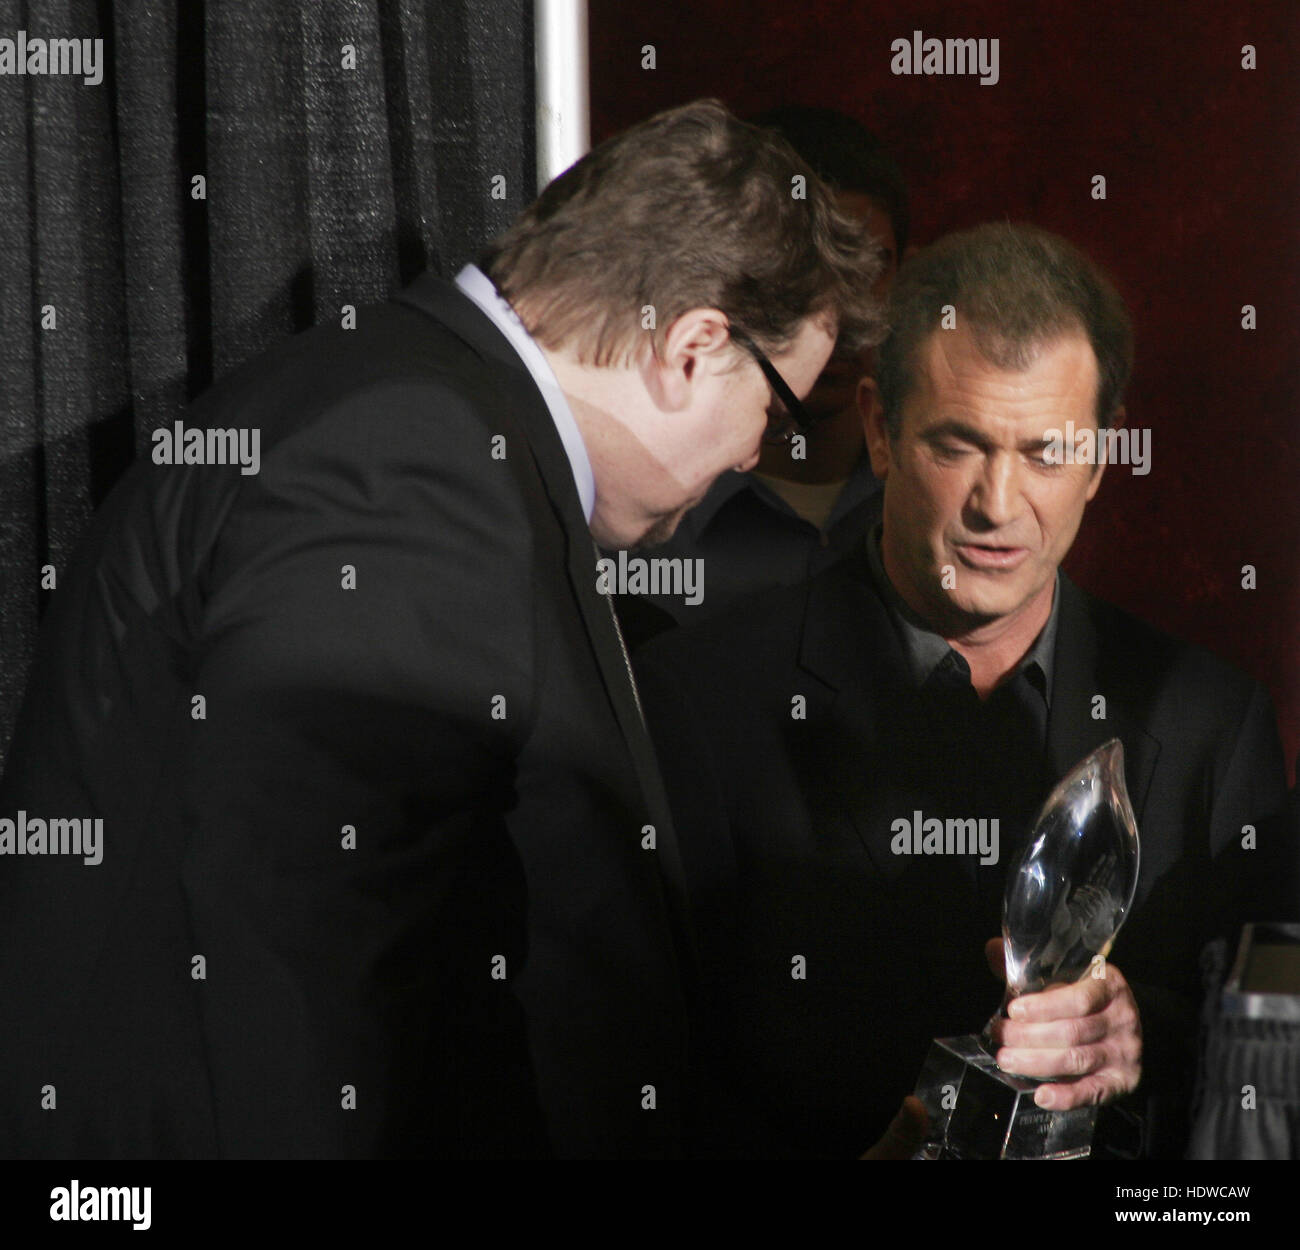 Michael Moore, left, and Mel Gibson meet backstage at the People's Choice Awards in Pasadena, California on Sunday January 9, 2005. Photo credit: Francis Specker Stock Photo